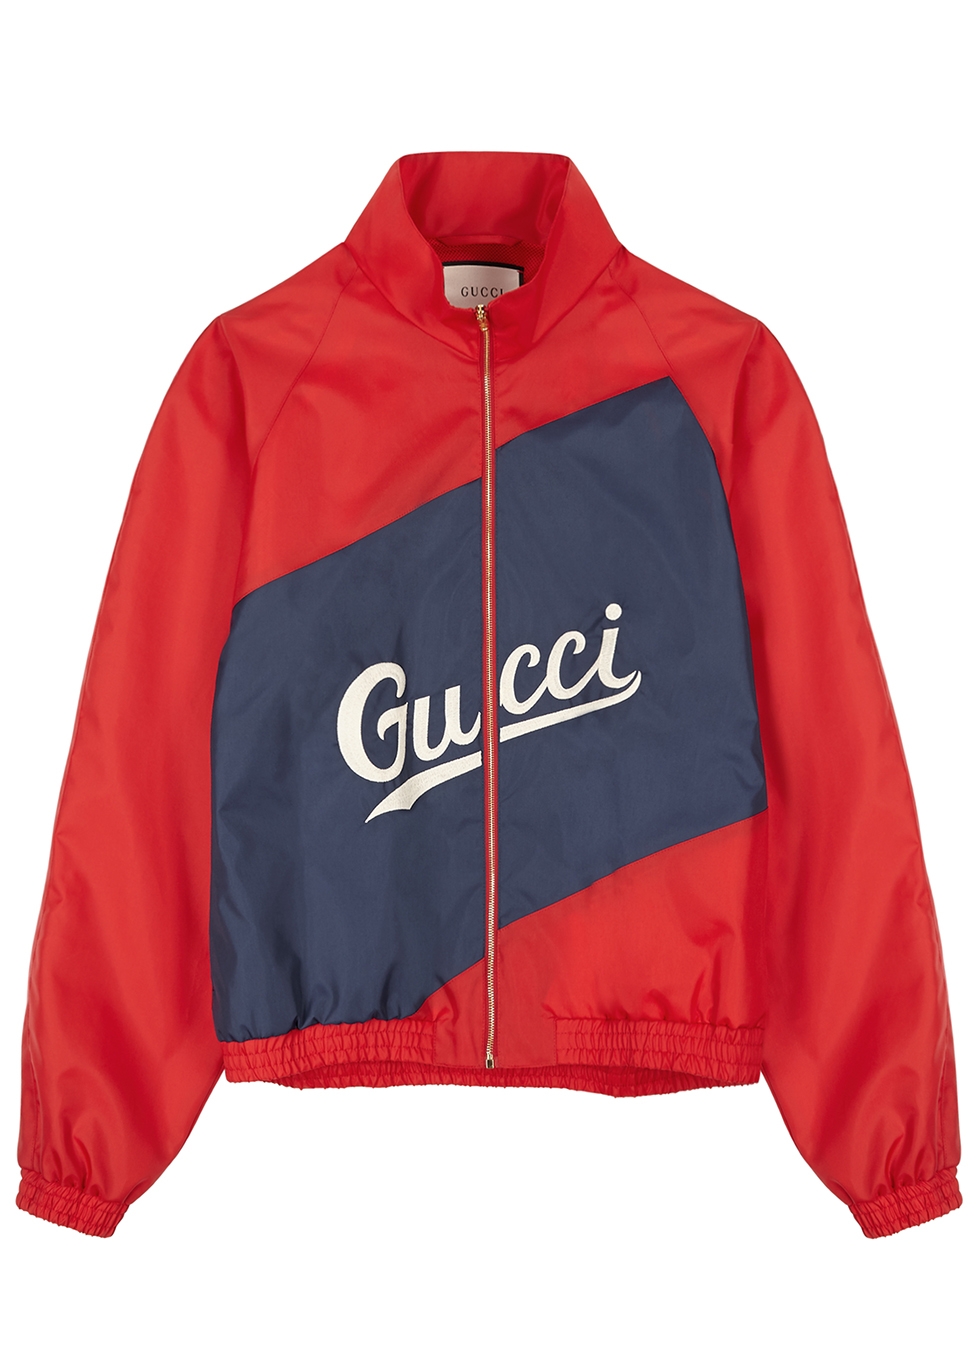 gucci bomber jacket red